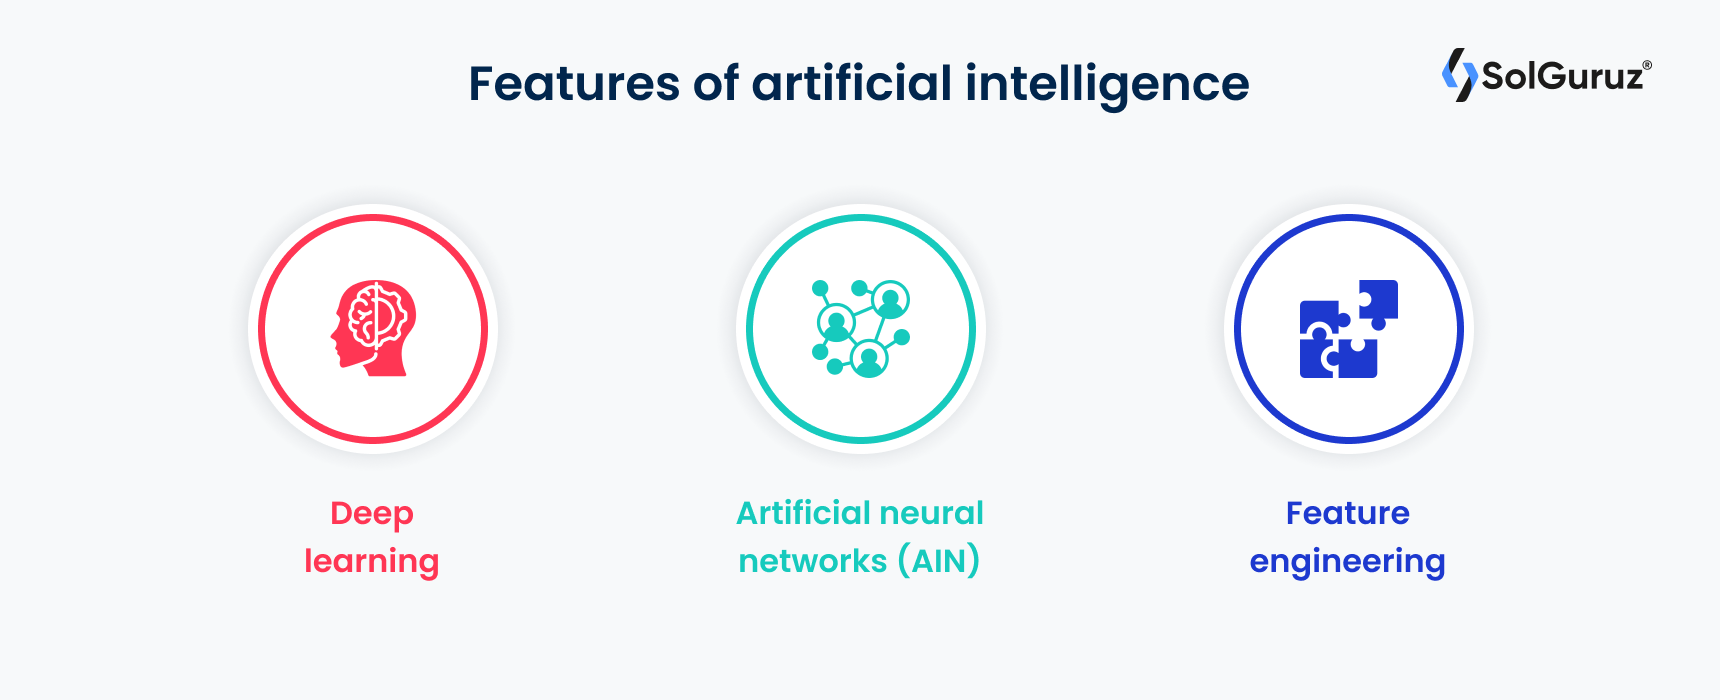 Features of artificial intelligence